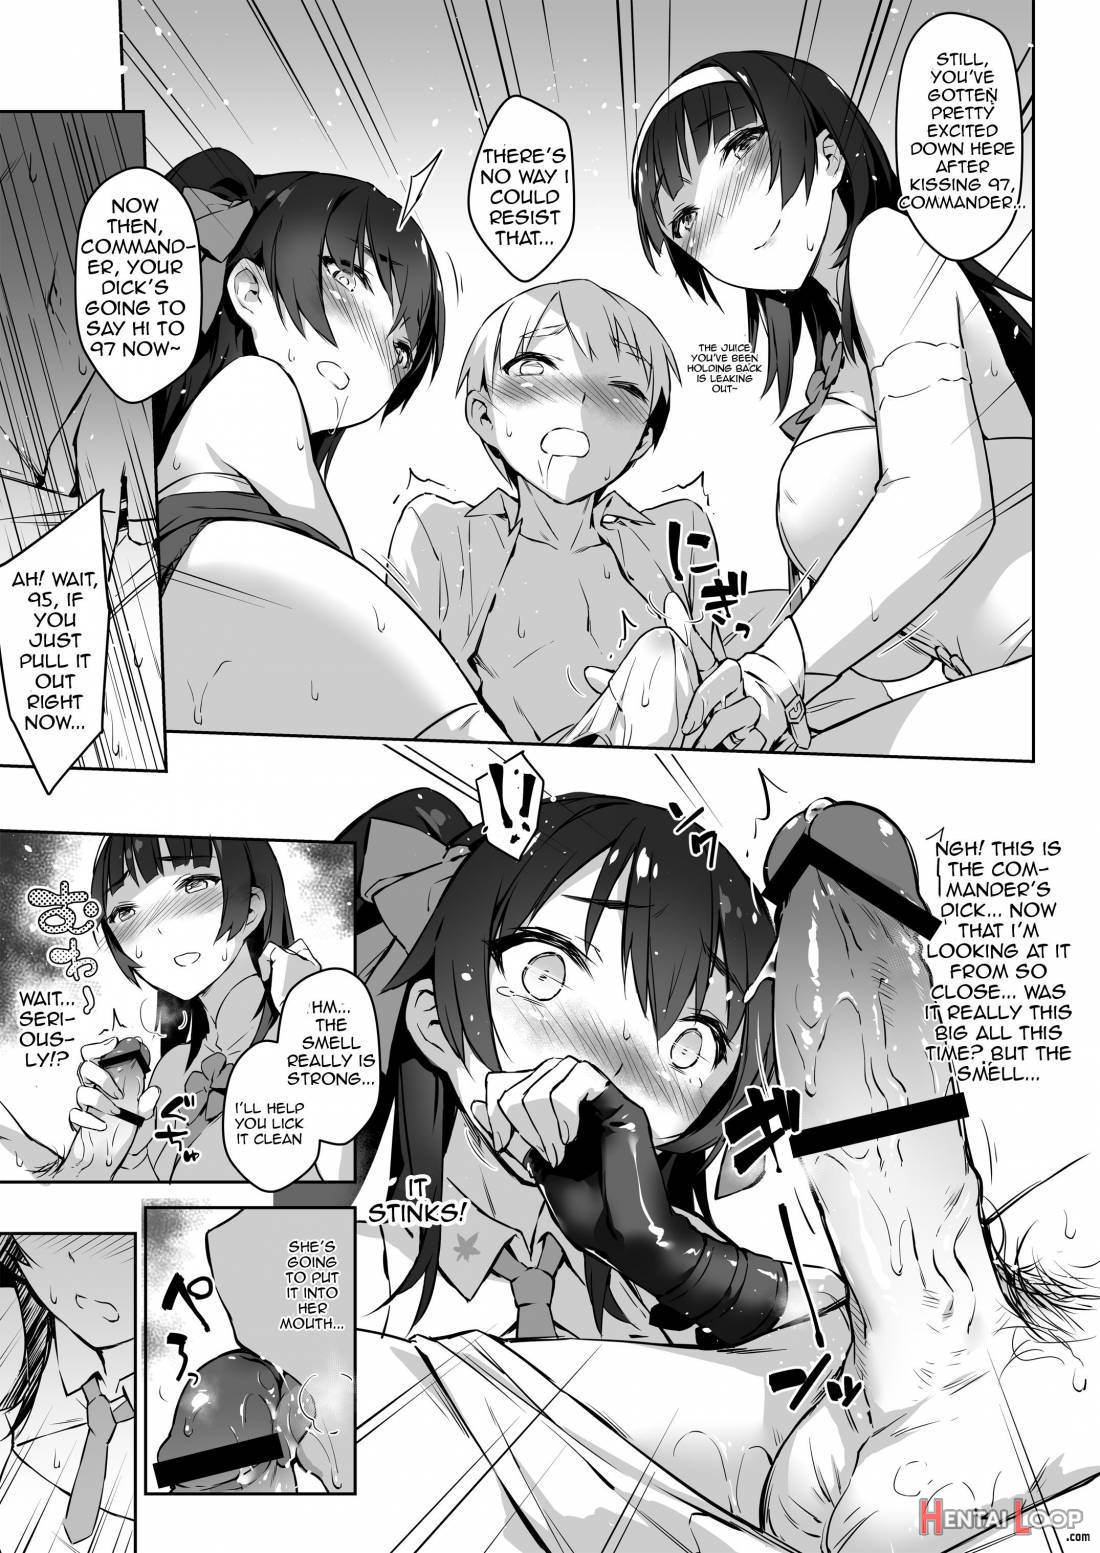 Type 95 Type 97, Let Your Big Sister Teach You! page 10